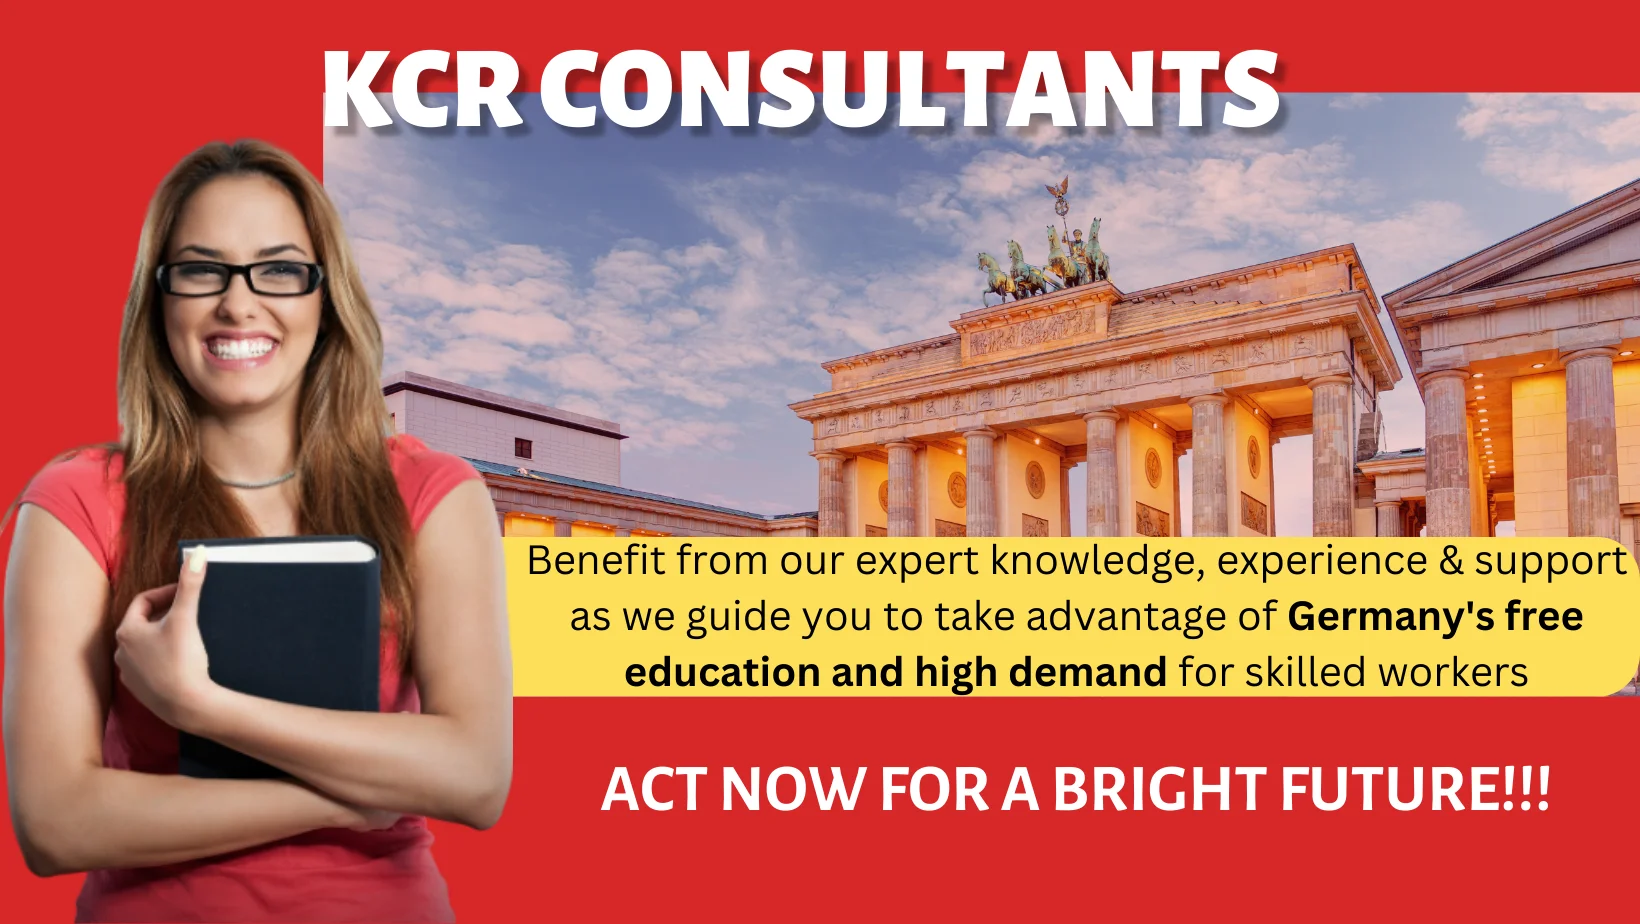 Thousands of students are migrating to Germany now to study in a German university, be in that environment, and graduate employable as Germany has a thriving job market. - KCR CONSULTANTS